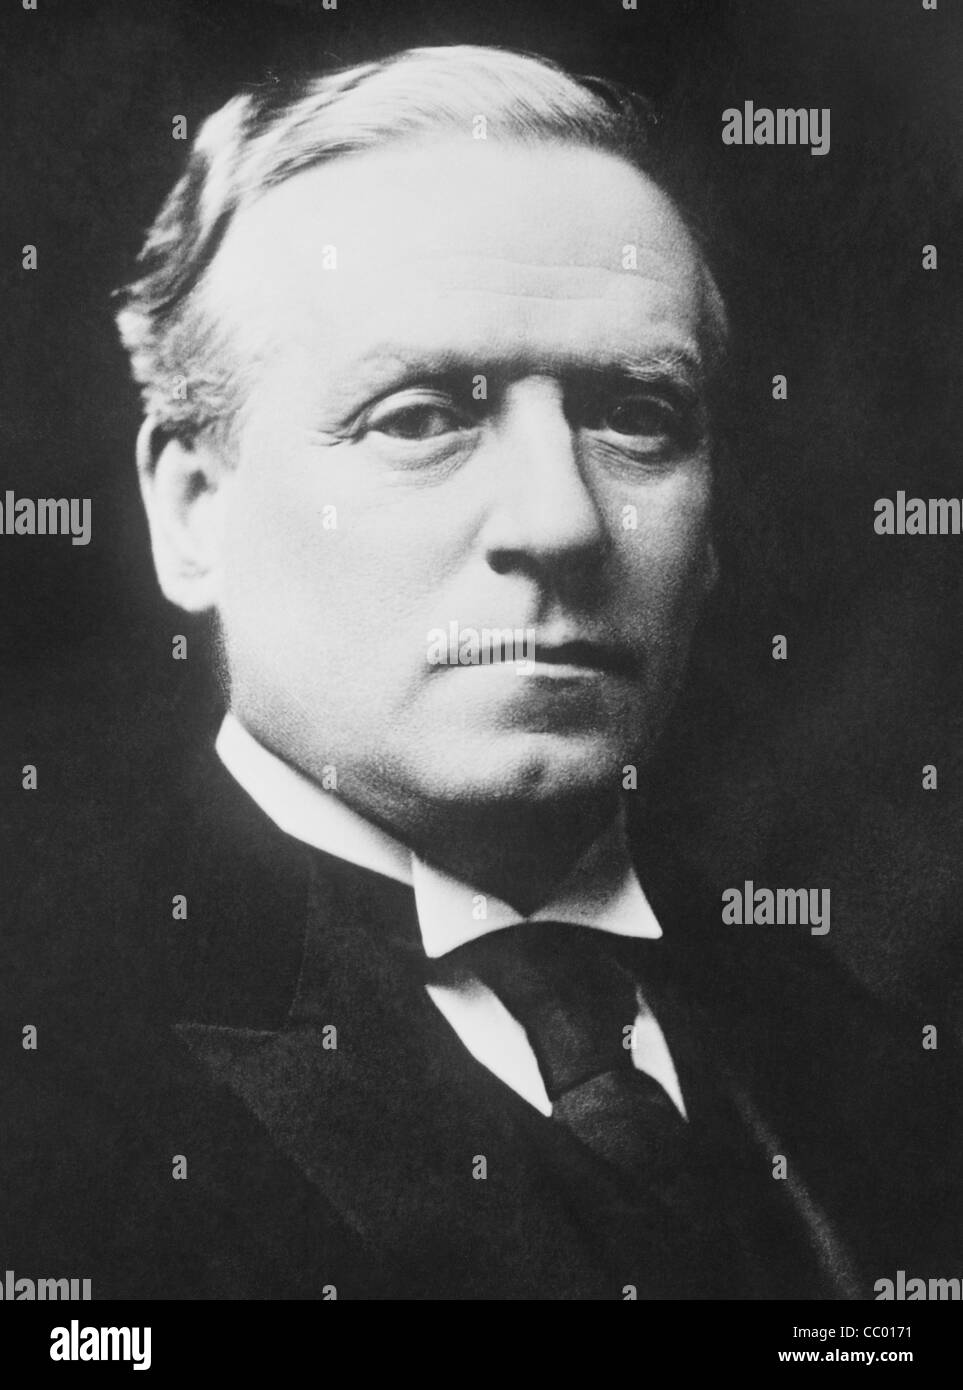 Vintage portrait photo circa 1910s of British politician Herbert Henry Asquith (1852 - 1928) - Liberal Prime Minister of the UK from 1908 - 1916. Stock Photo